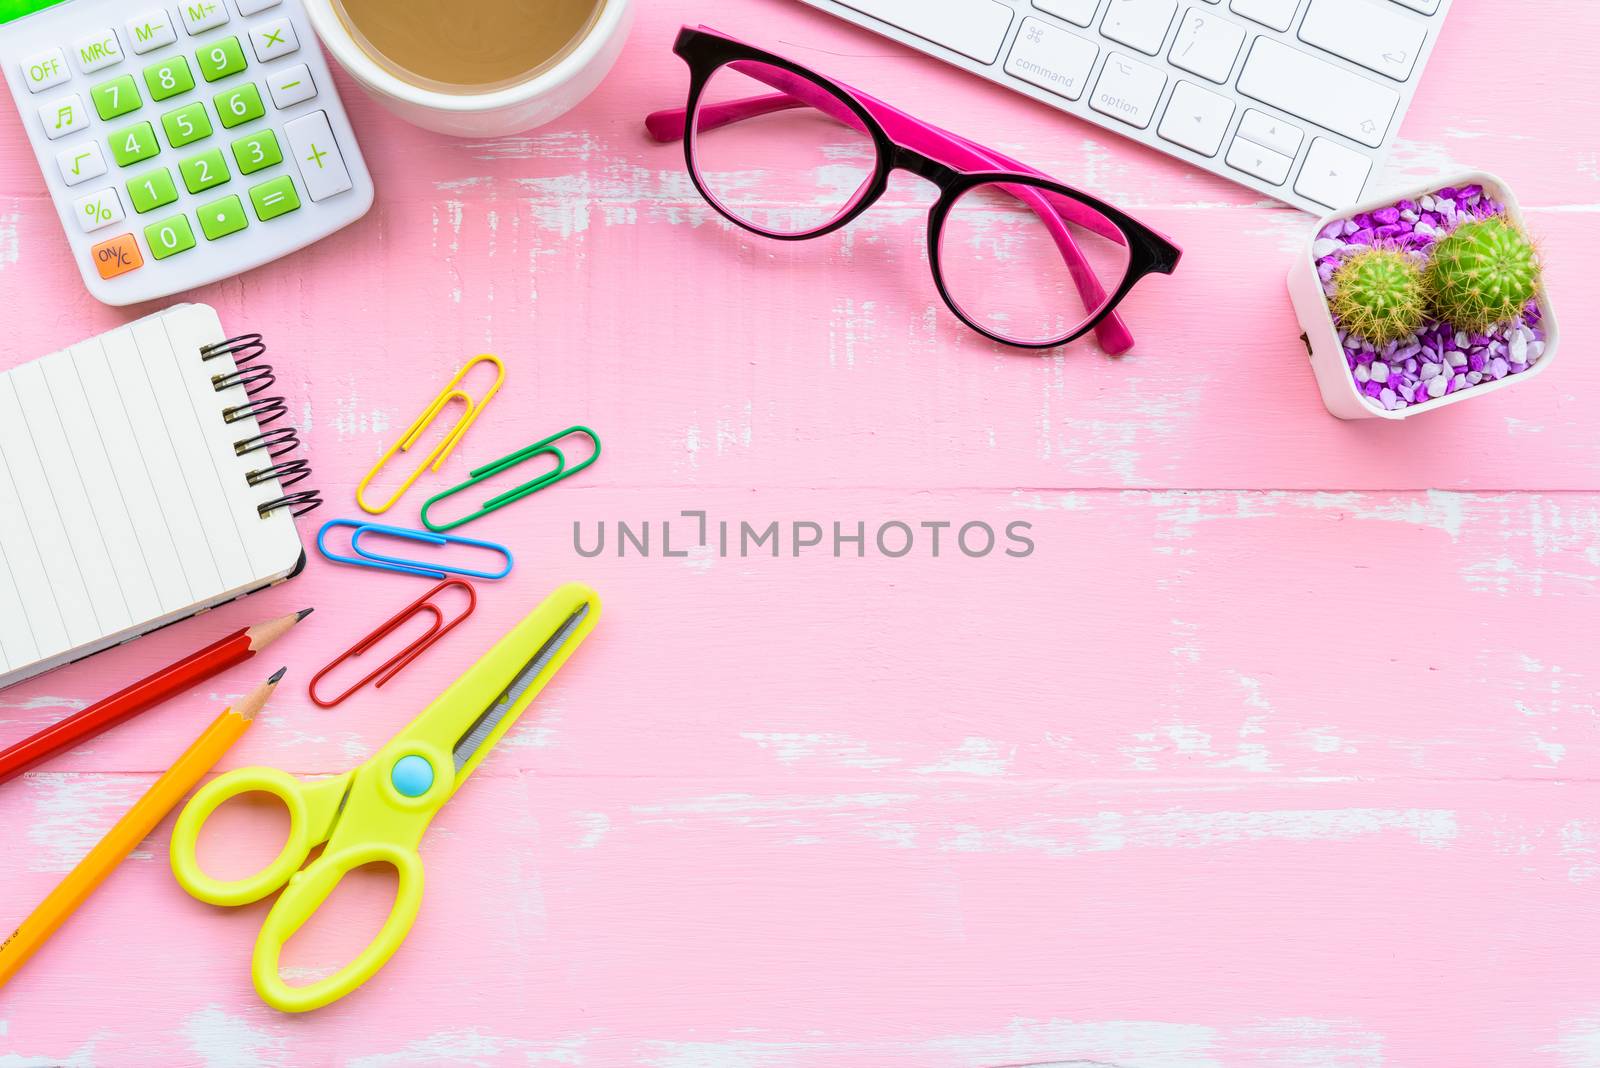 Top view office table with workspace and office accessories including calculator, mouse, keyboard, glasses, clips, flower, pen, pencil, note book, laptop and coffee on pink wooden background.